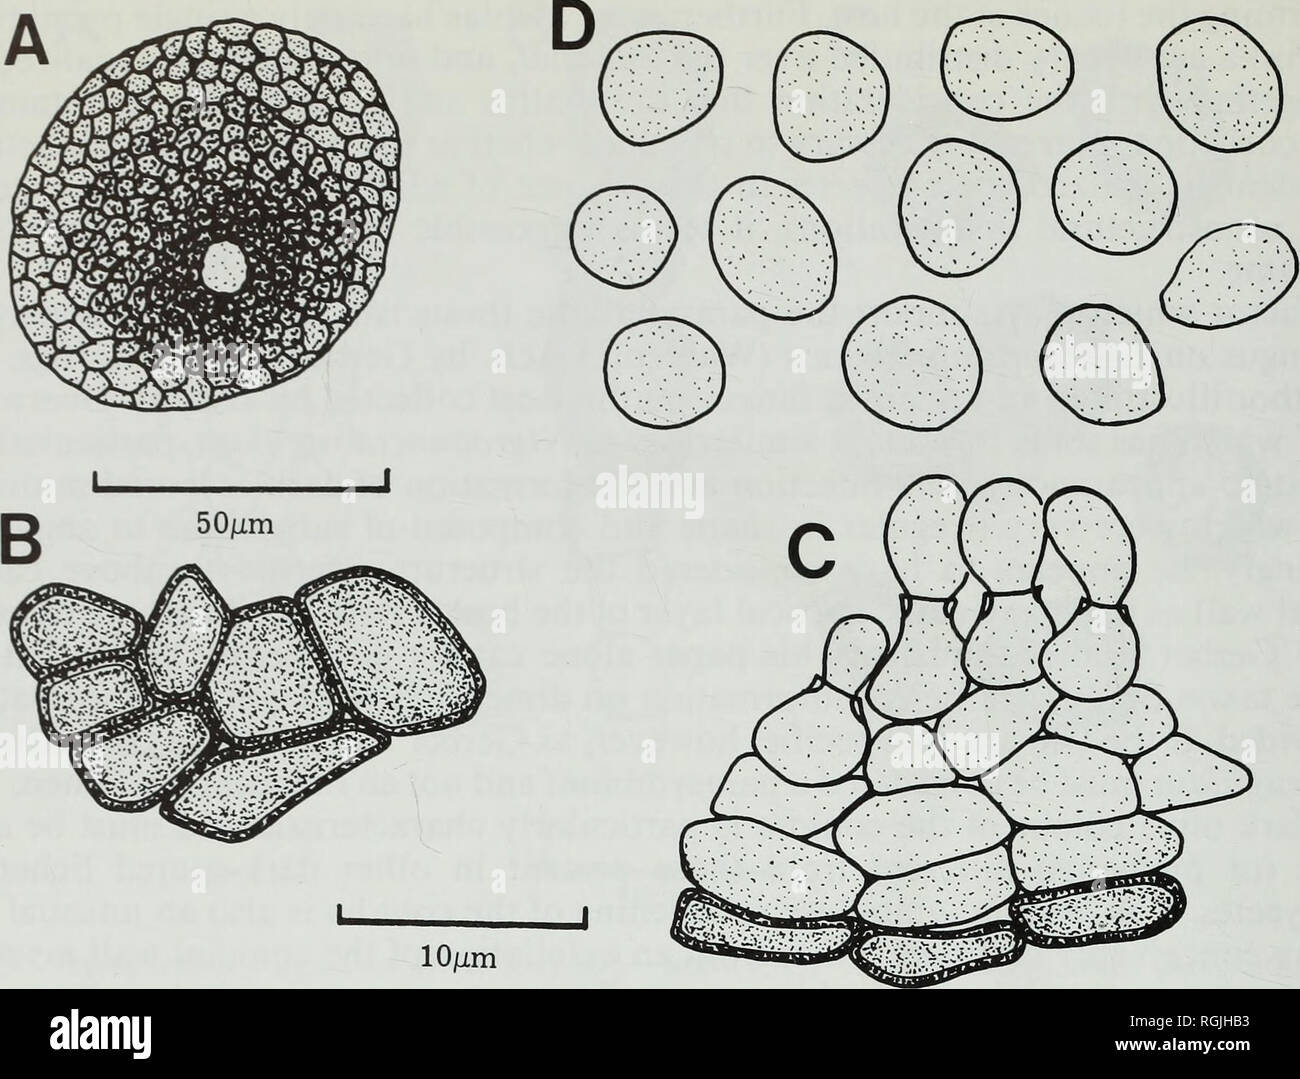 . Bulletin of the British Museum (Natural History). Botany; Botany. 50 D. L. HAWKSWORTH. Fig. 24 Phoma caloplacae (UPS—holotype). A, Surface view of pycnidium. B, Surface view of pycnidial wall. C, Conidiogenous cells and pycnidial wall. D, Conidia. Observations: Phoma-like fungi on lichens have often been placed in Phyllosticta Pers. ex Desm., a genus formerly adopted for similar fungi on leaves as opposed to stems, presumably in the belief that lichen thalli approximated more closely to 'leaves' than 'stems'. The type species of Phyllosticta, however, is in any case very different, conformin Stock Photo